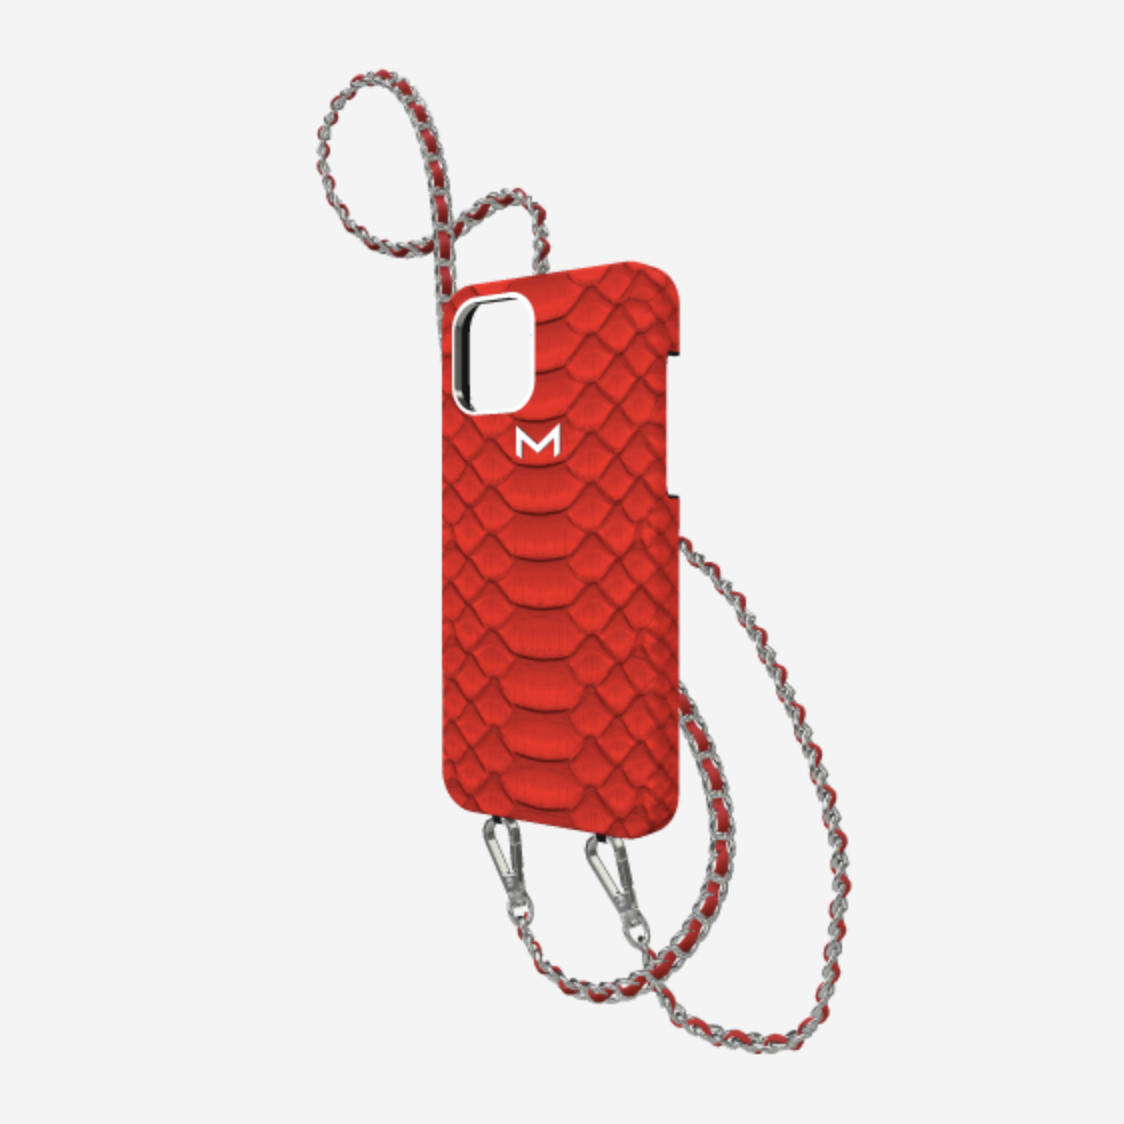 Necklace Case for iPhone 12 Pro Max in Genuine Python Glamour Red Steel 316 